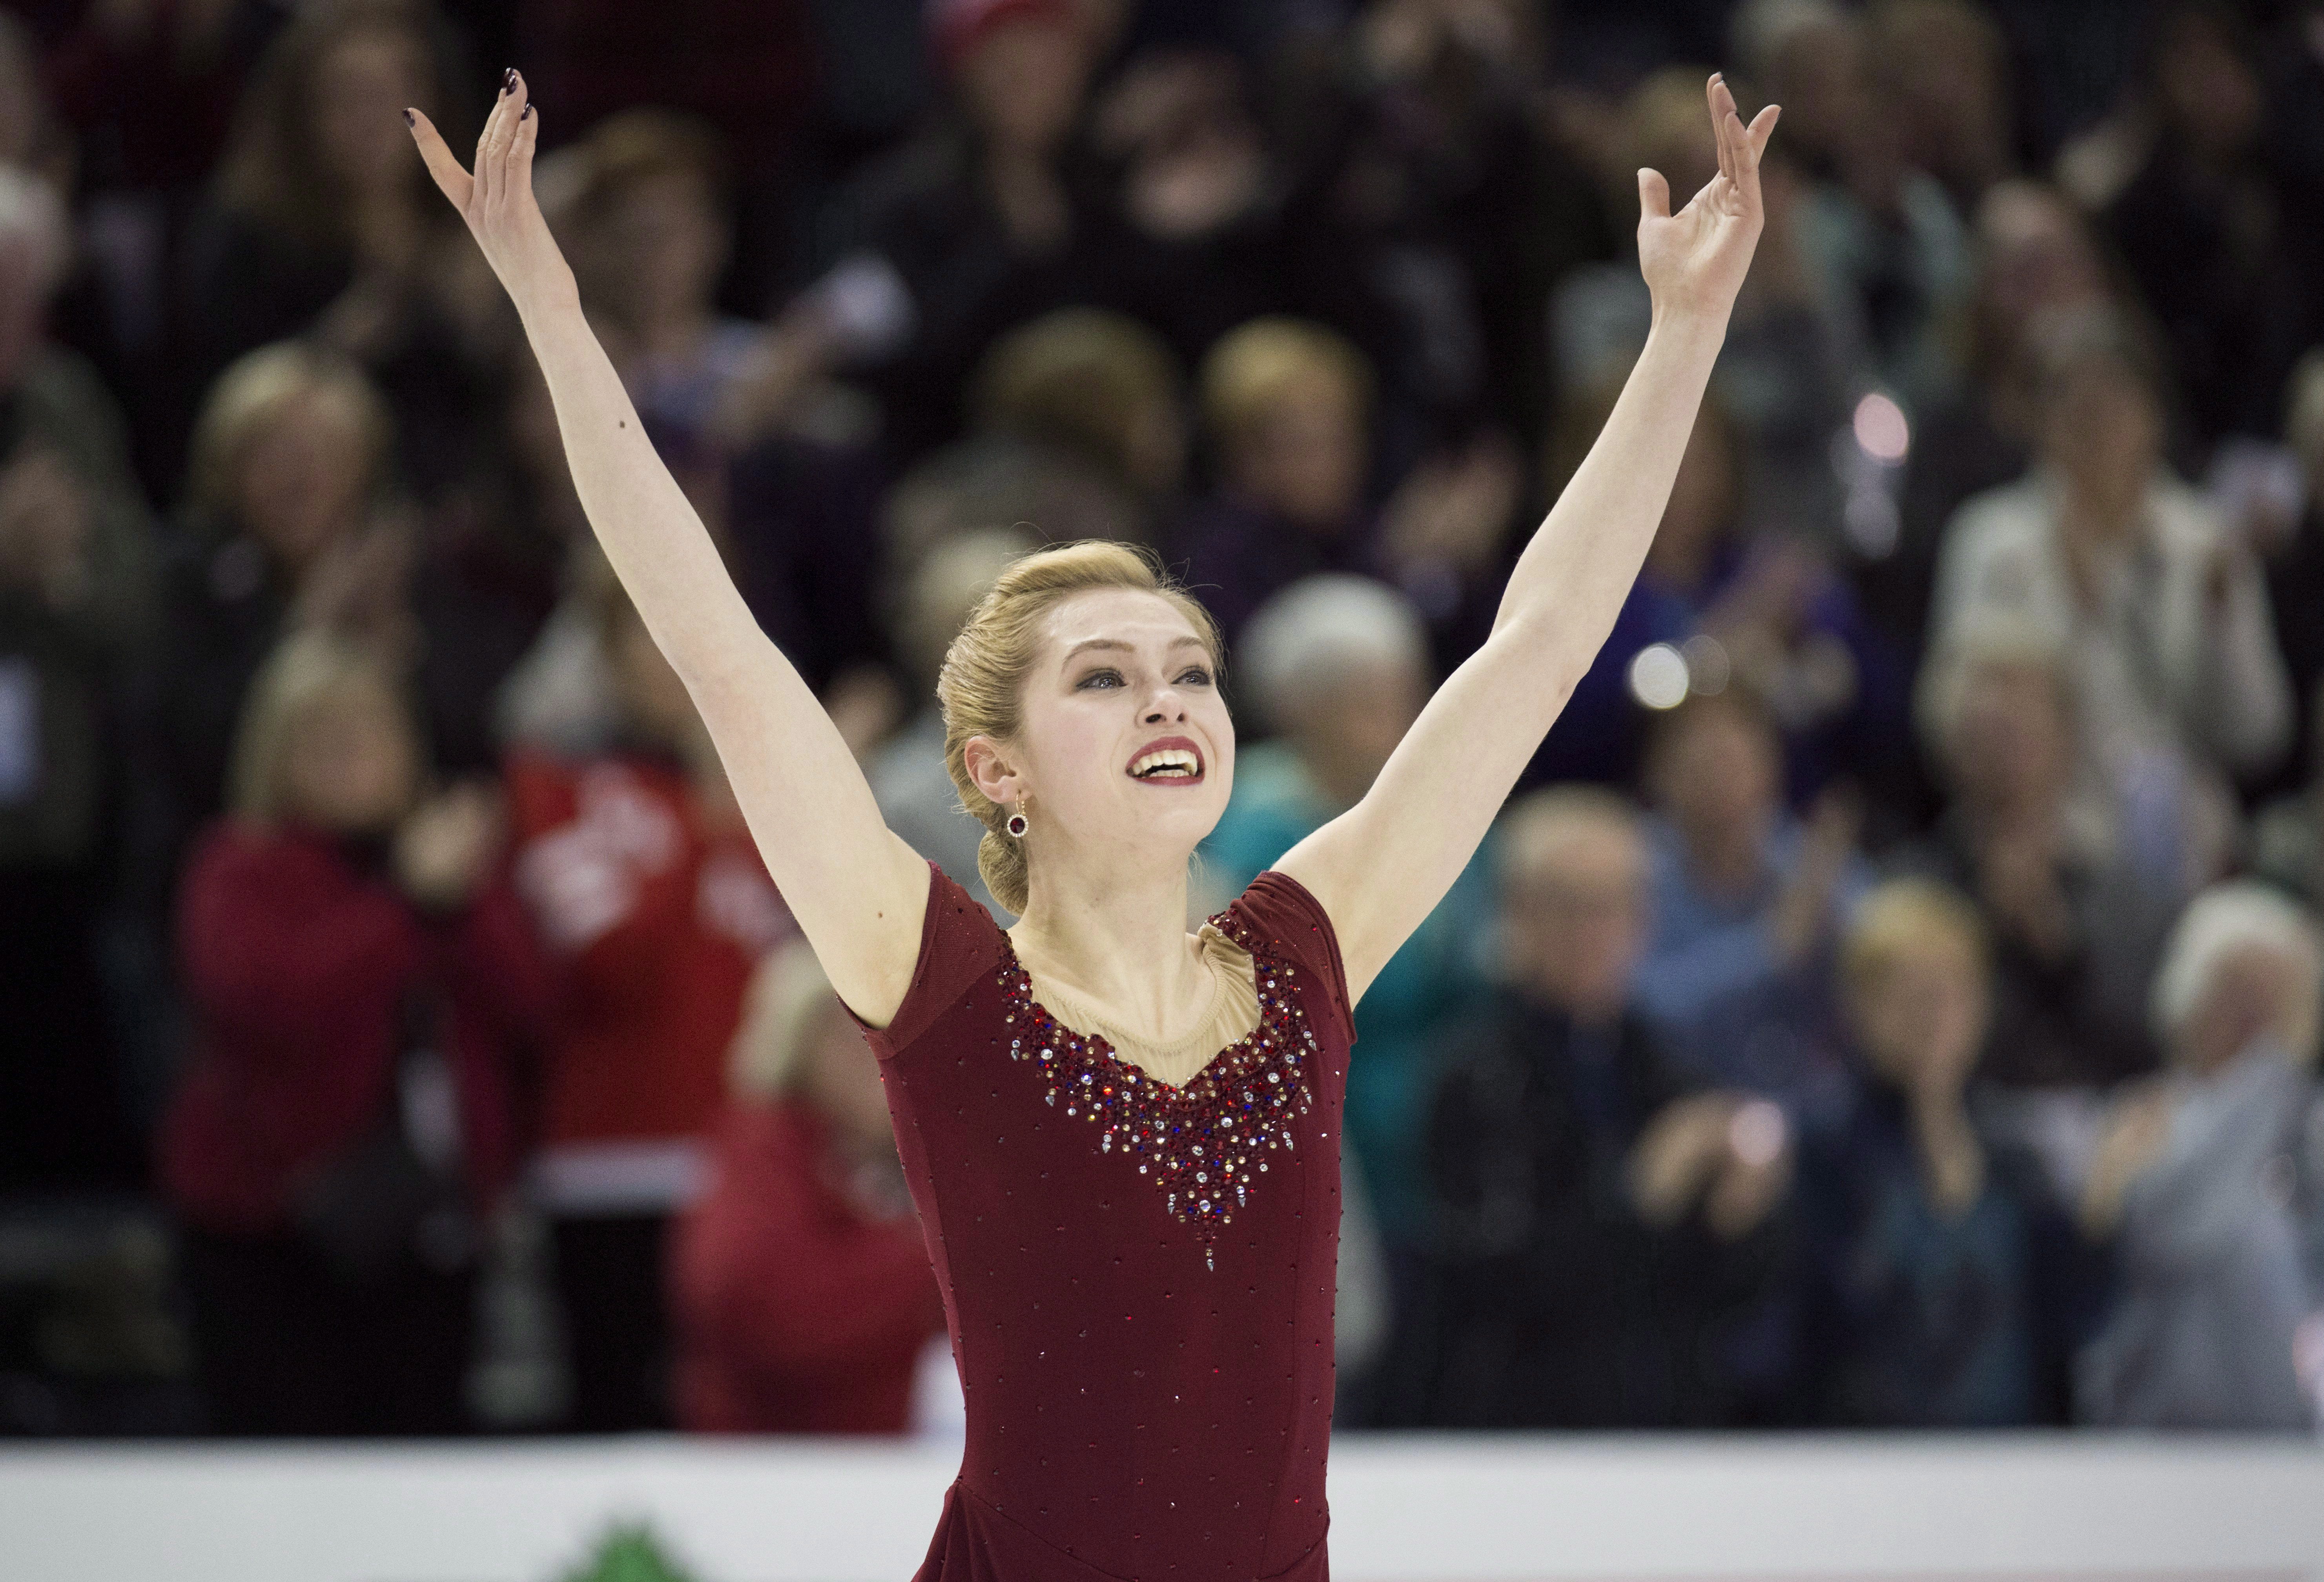 Alaine Chartrand acknowledges the crowd following her free program during the Canadian Figure Skating Championships in Halifax on Saturday, January 23, 2016. THE CANADIAN PRESS/Darren Calabrese